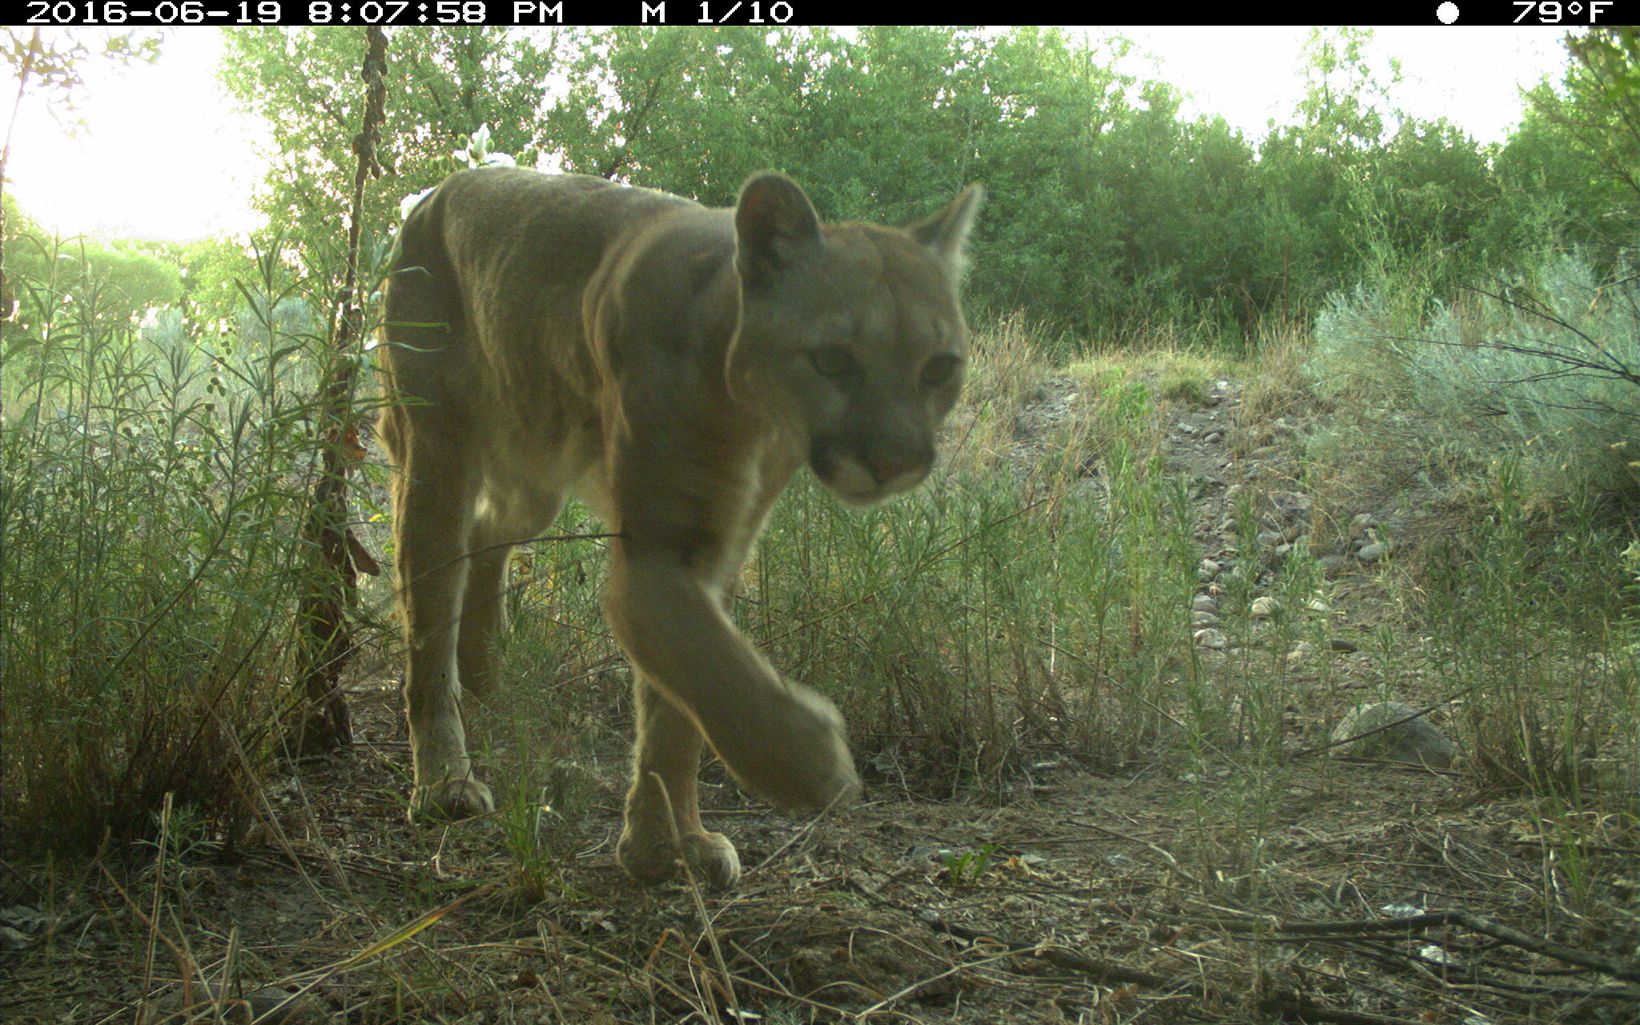 Home for many A great diversity of people and animals call the river and floodplain home, including this mountain lion seen by our preserve’s motion sensor cameras. © Keith Geluso/TNC